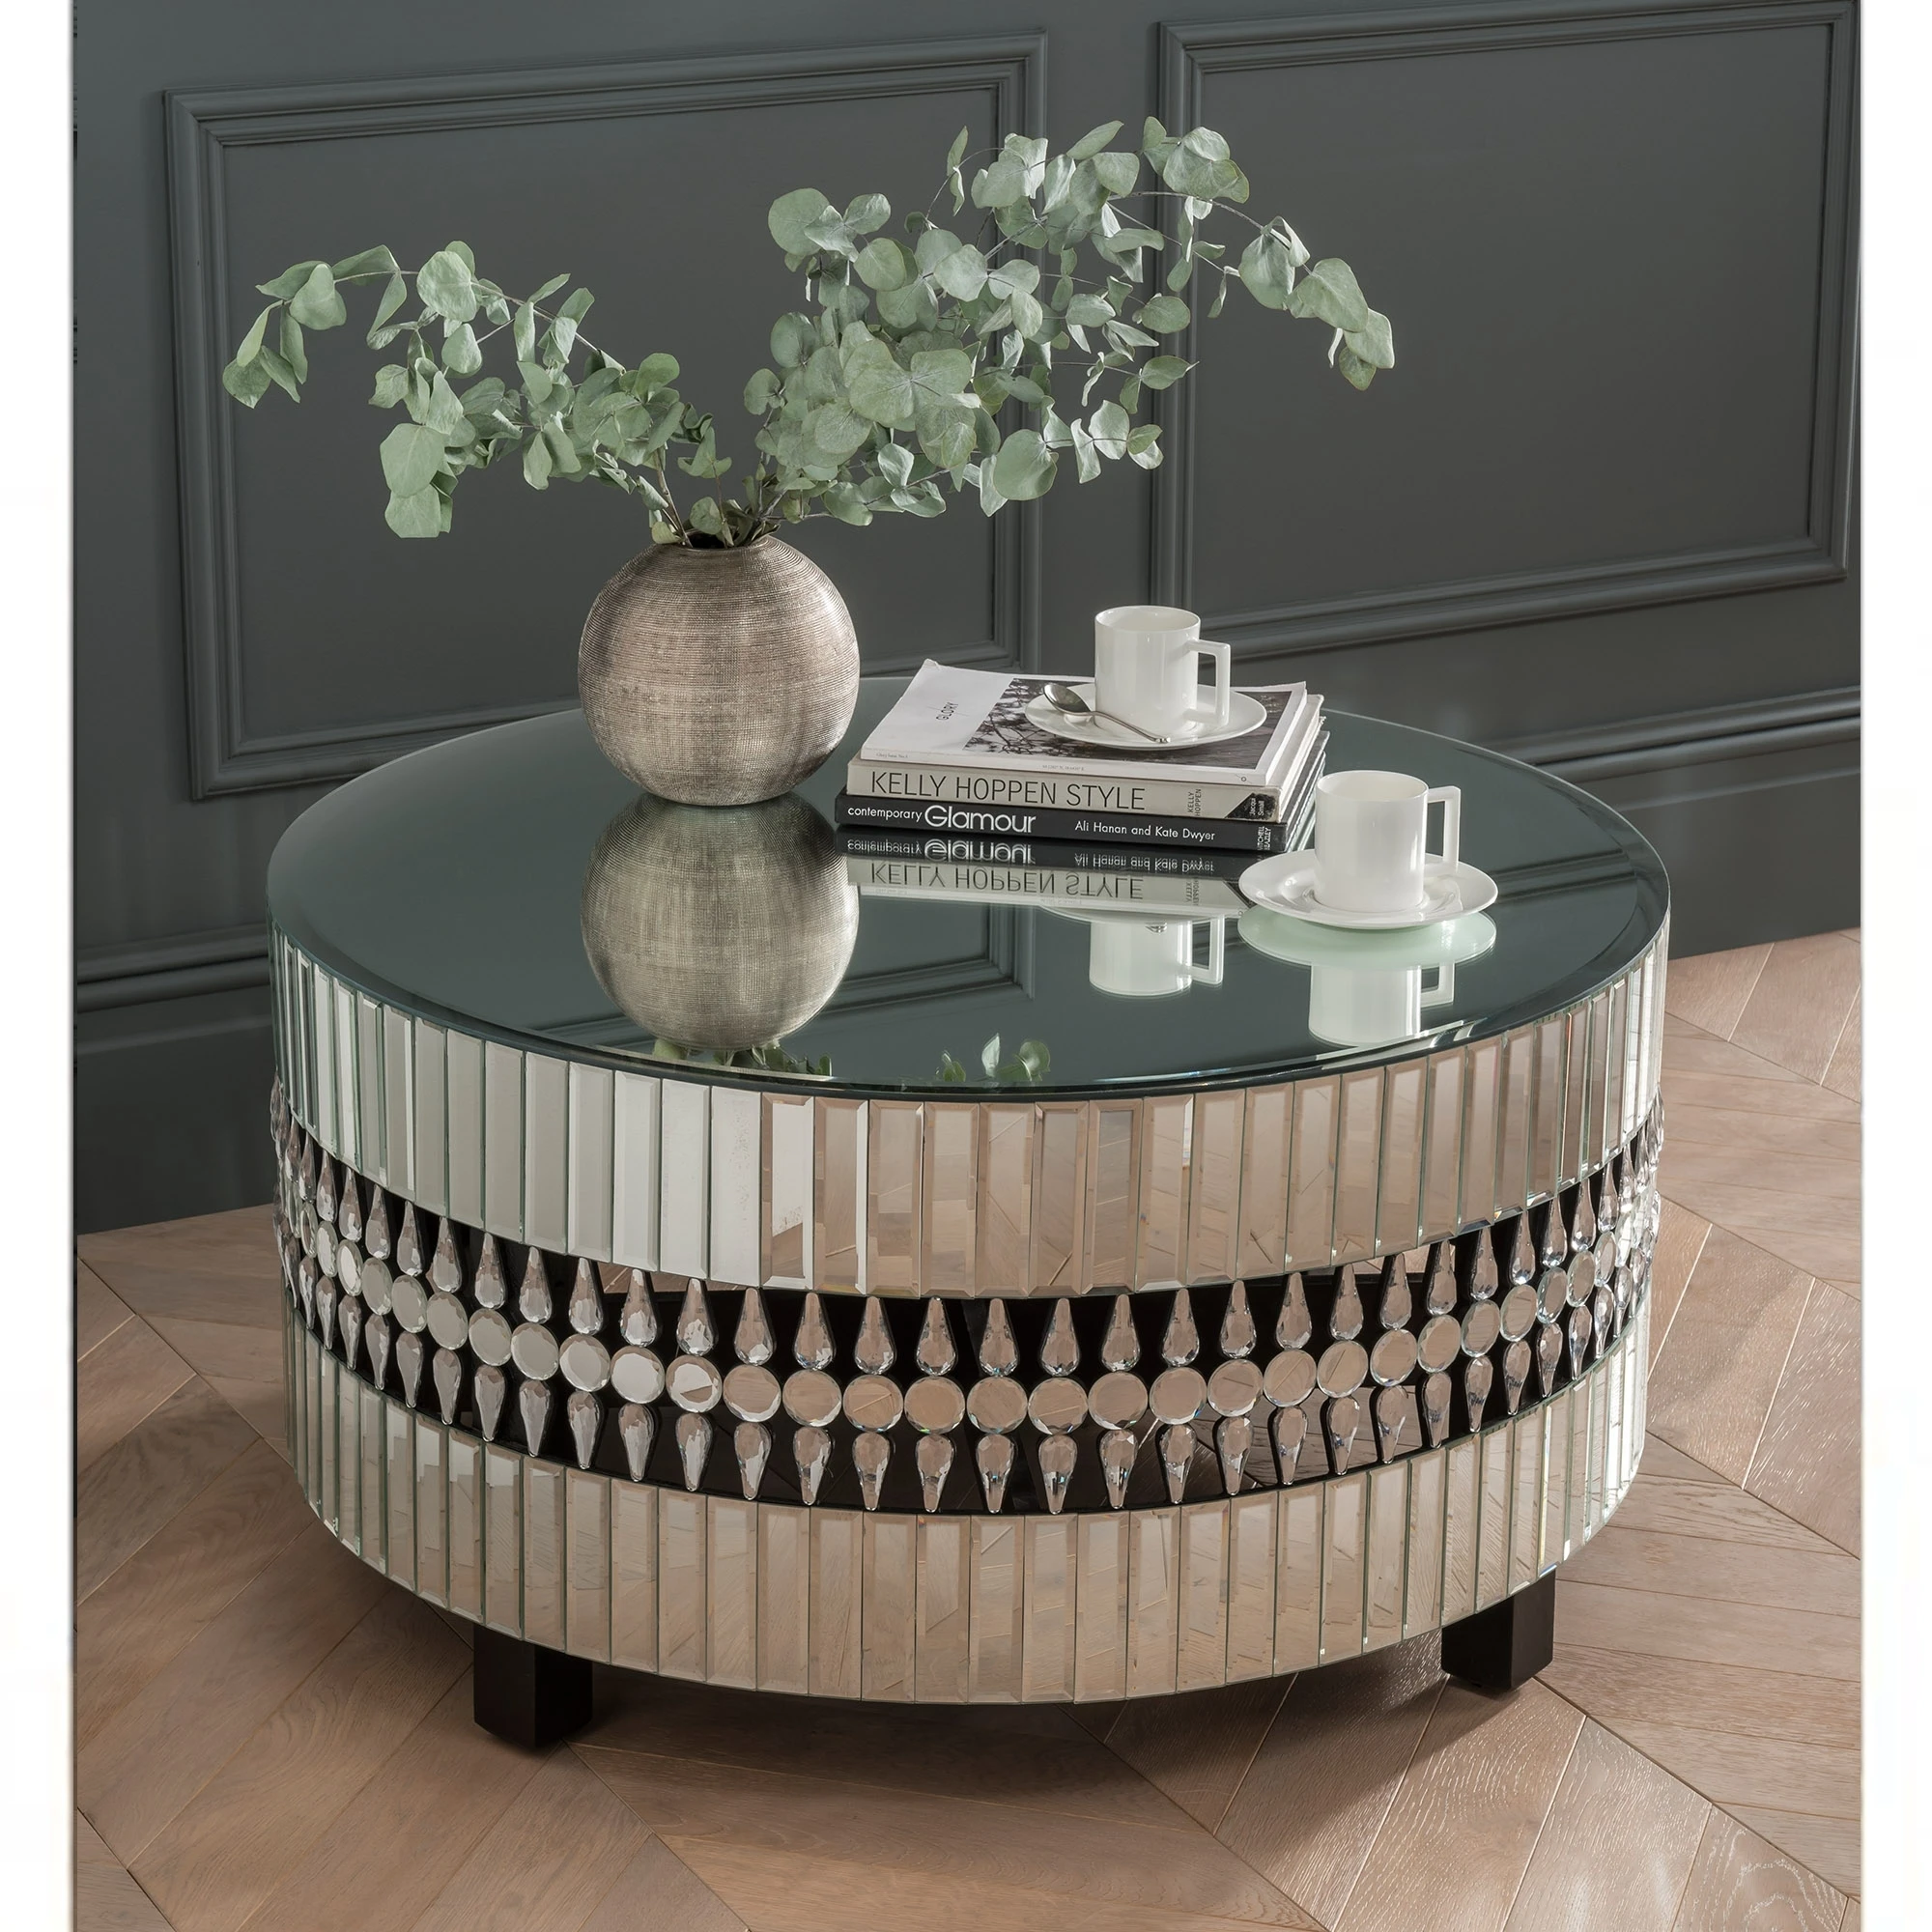 2018 Hotsale Home Hotel Living Room Round Crystal Mirror Coffee Table Buy Modern Round Mirror Coffee Table